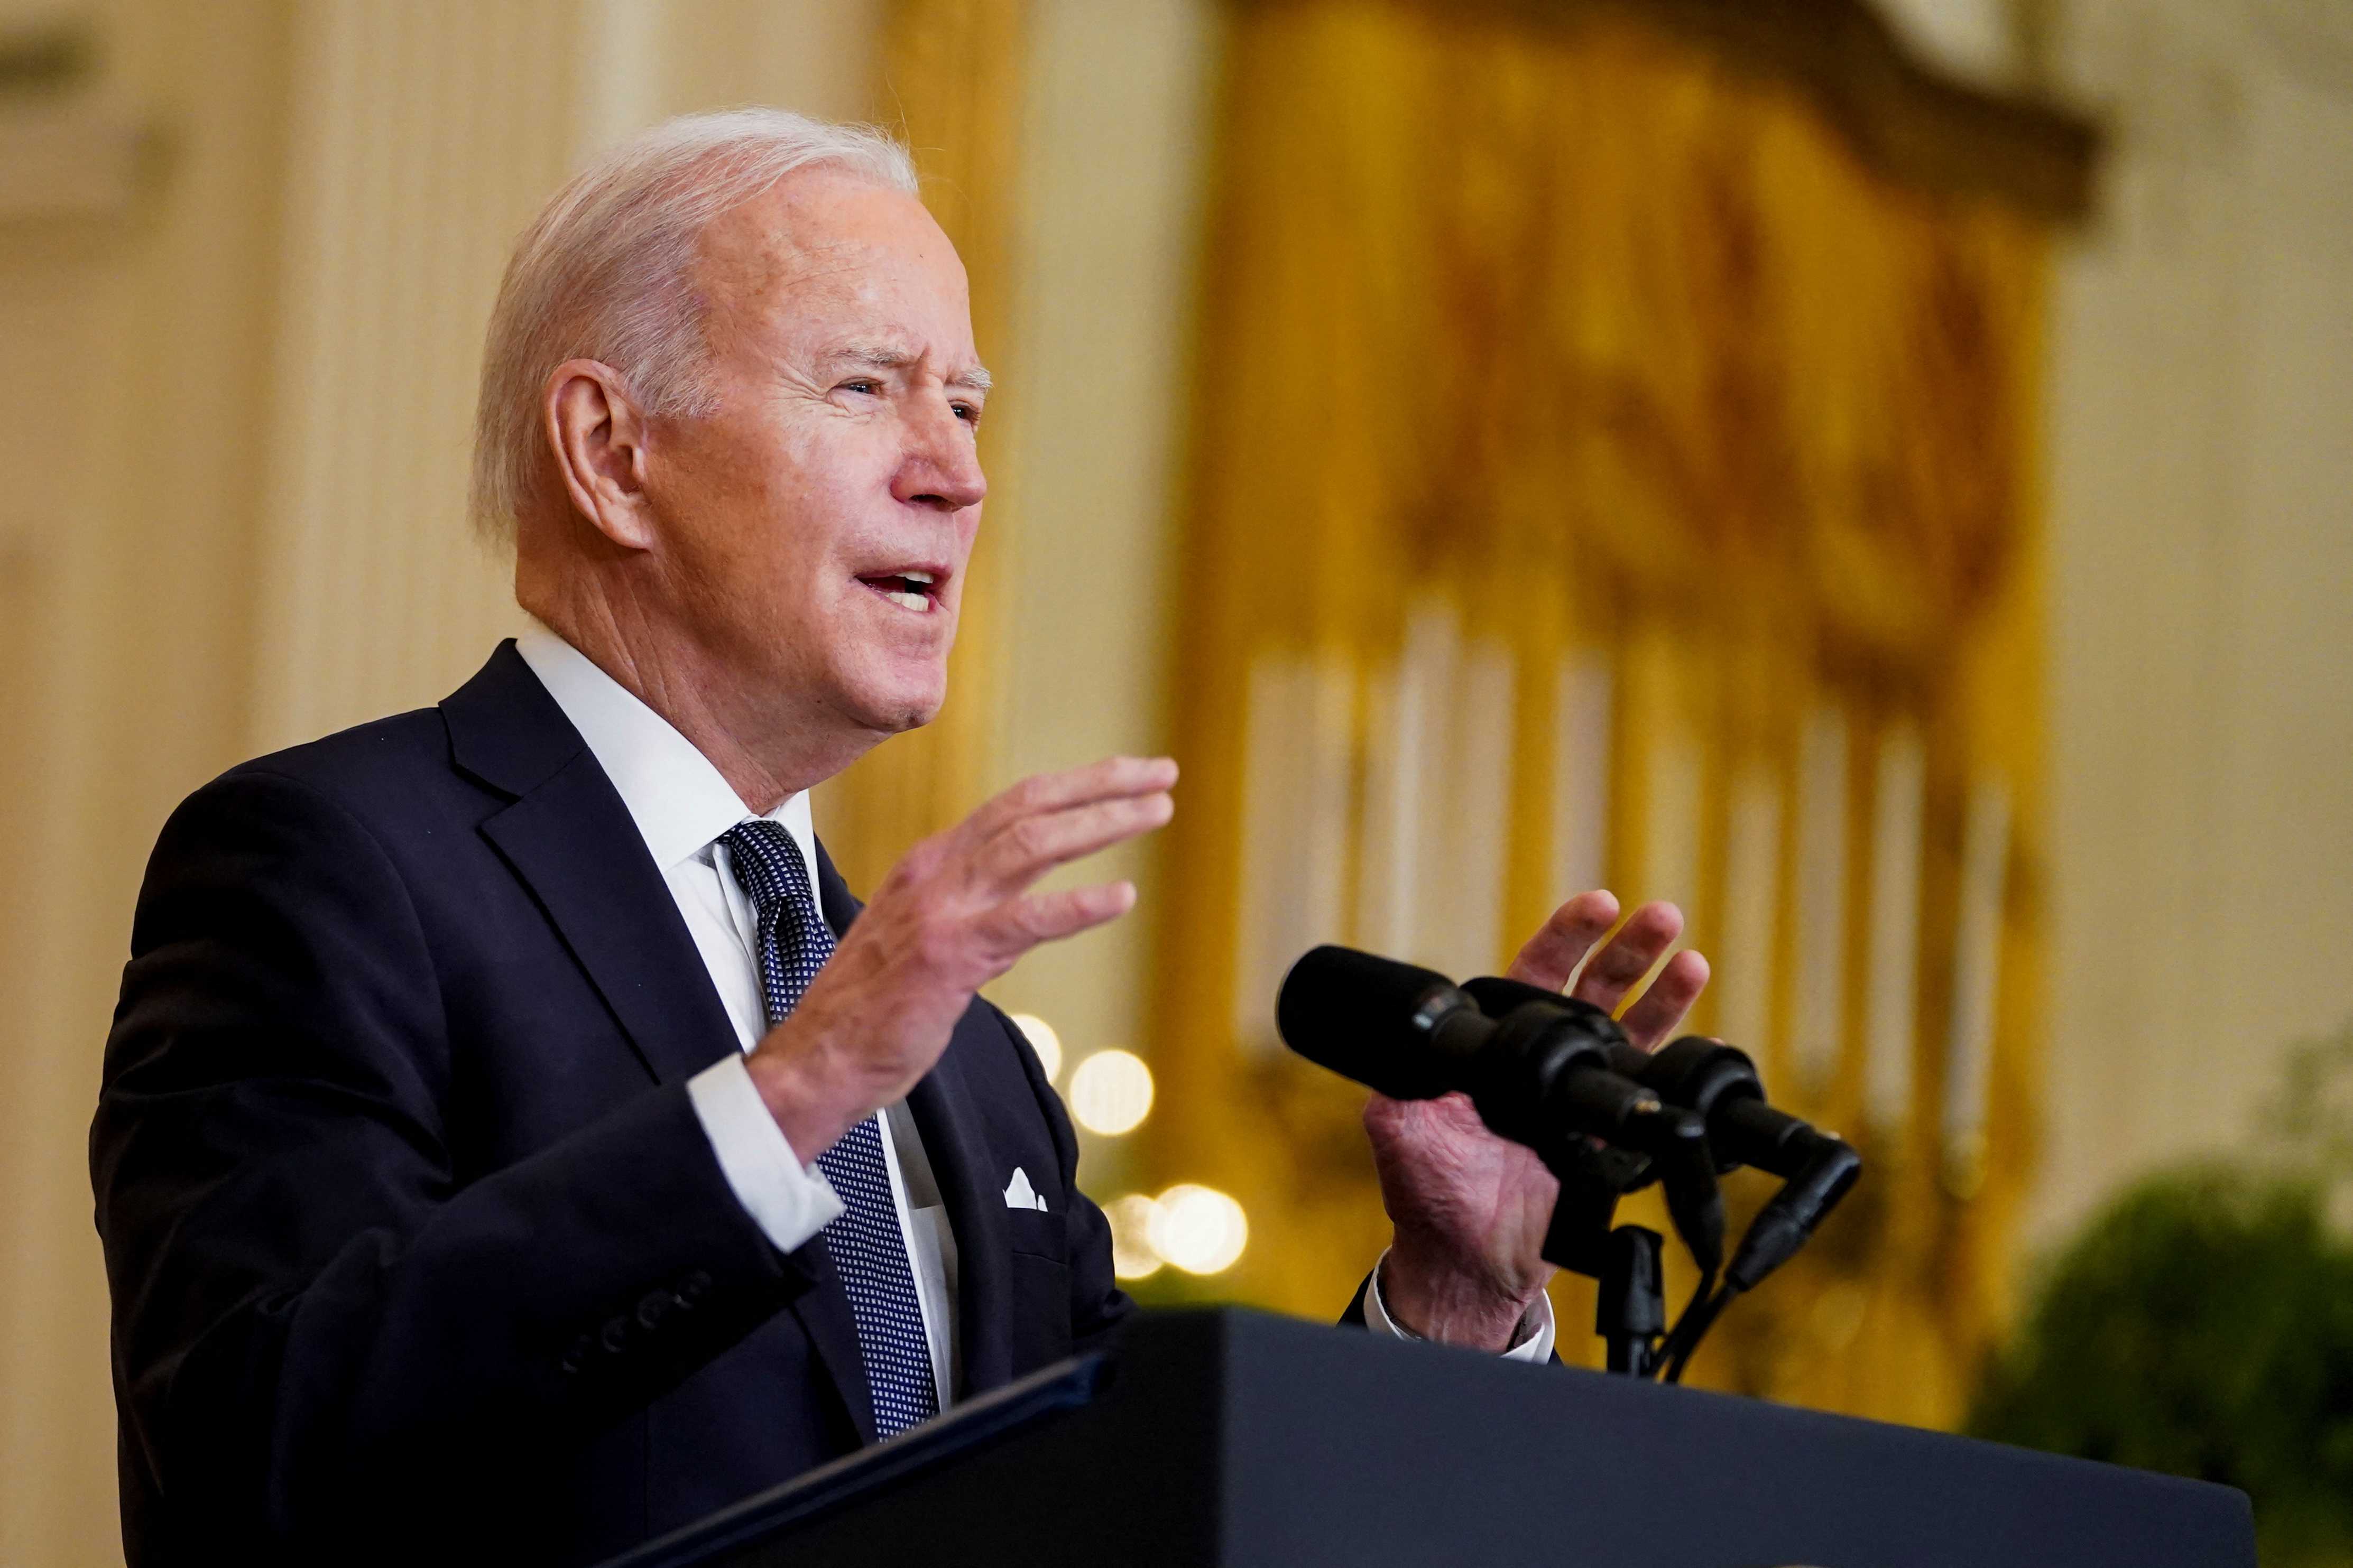 Ukraine crisis: Human cost of Russia attack would be immense - Biden